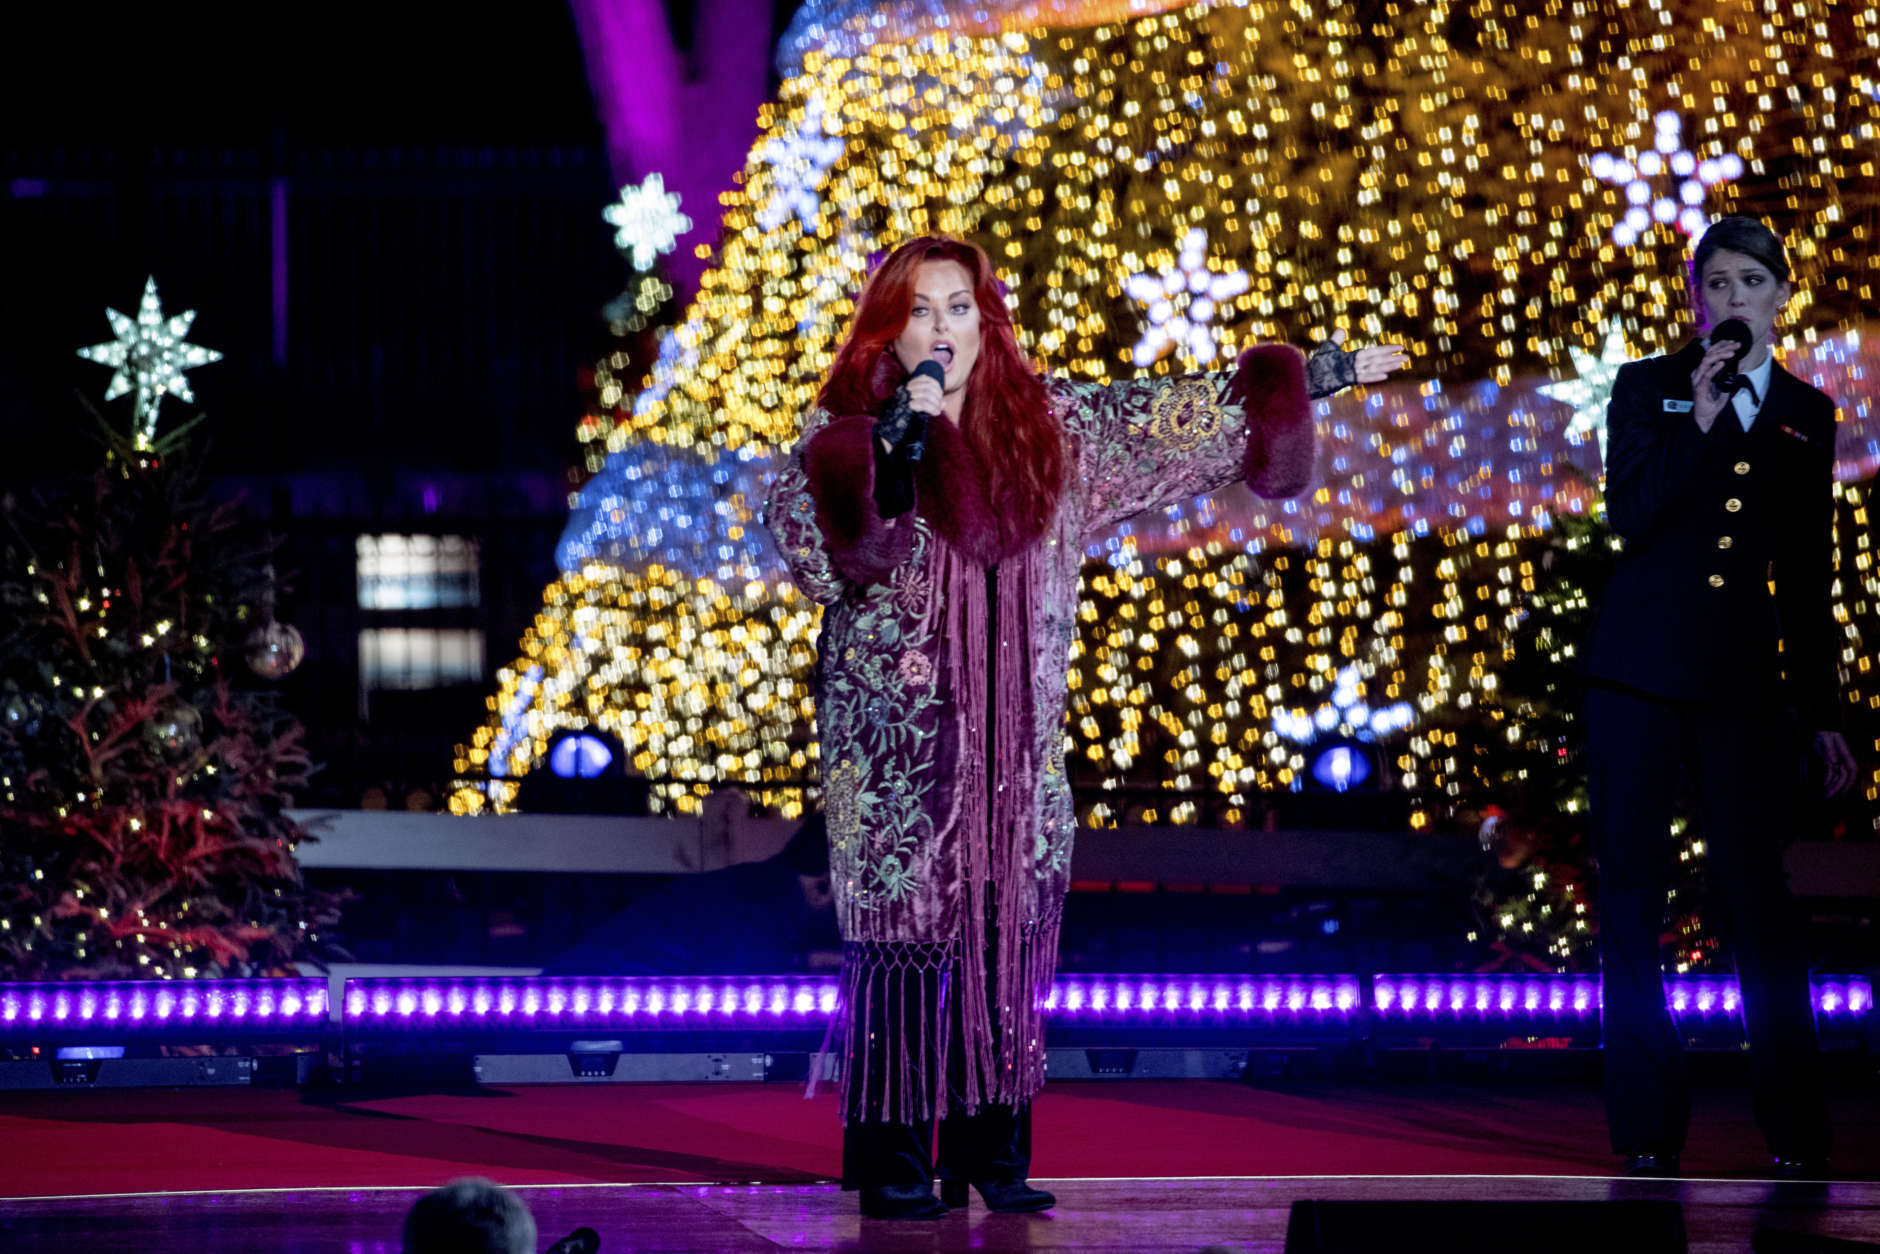 Wynonna performs during the lighting ceremony for the 2017 National Christmas Tree on the Ellipse near the White House, Thursday, Nov. 30, 2017, in Washington. (AP Photo/Andrew Harnik)